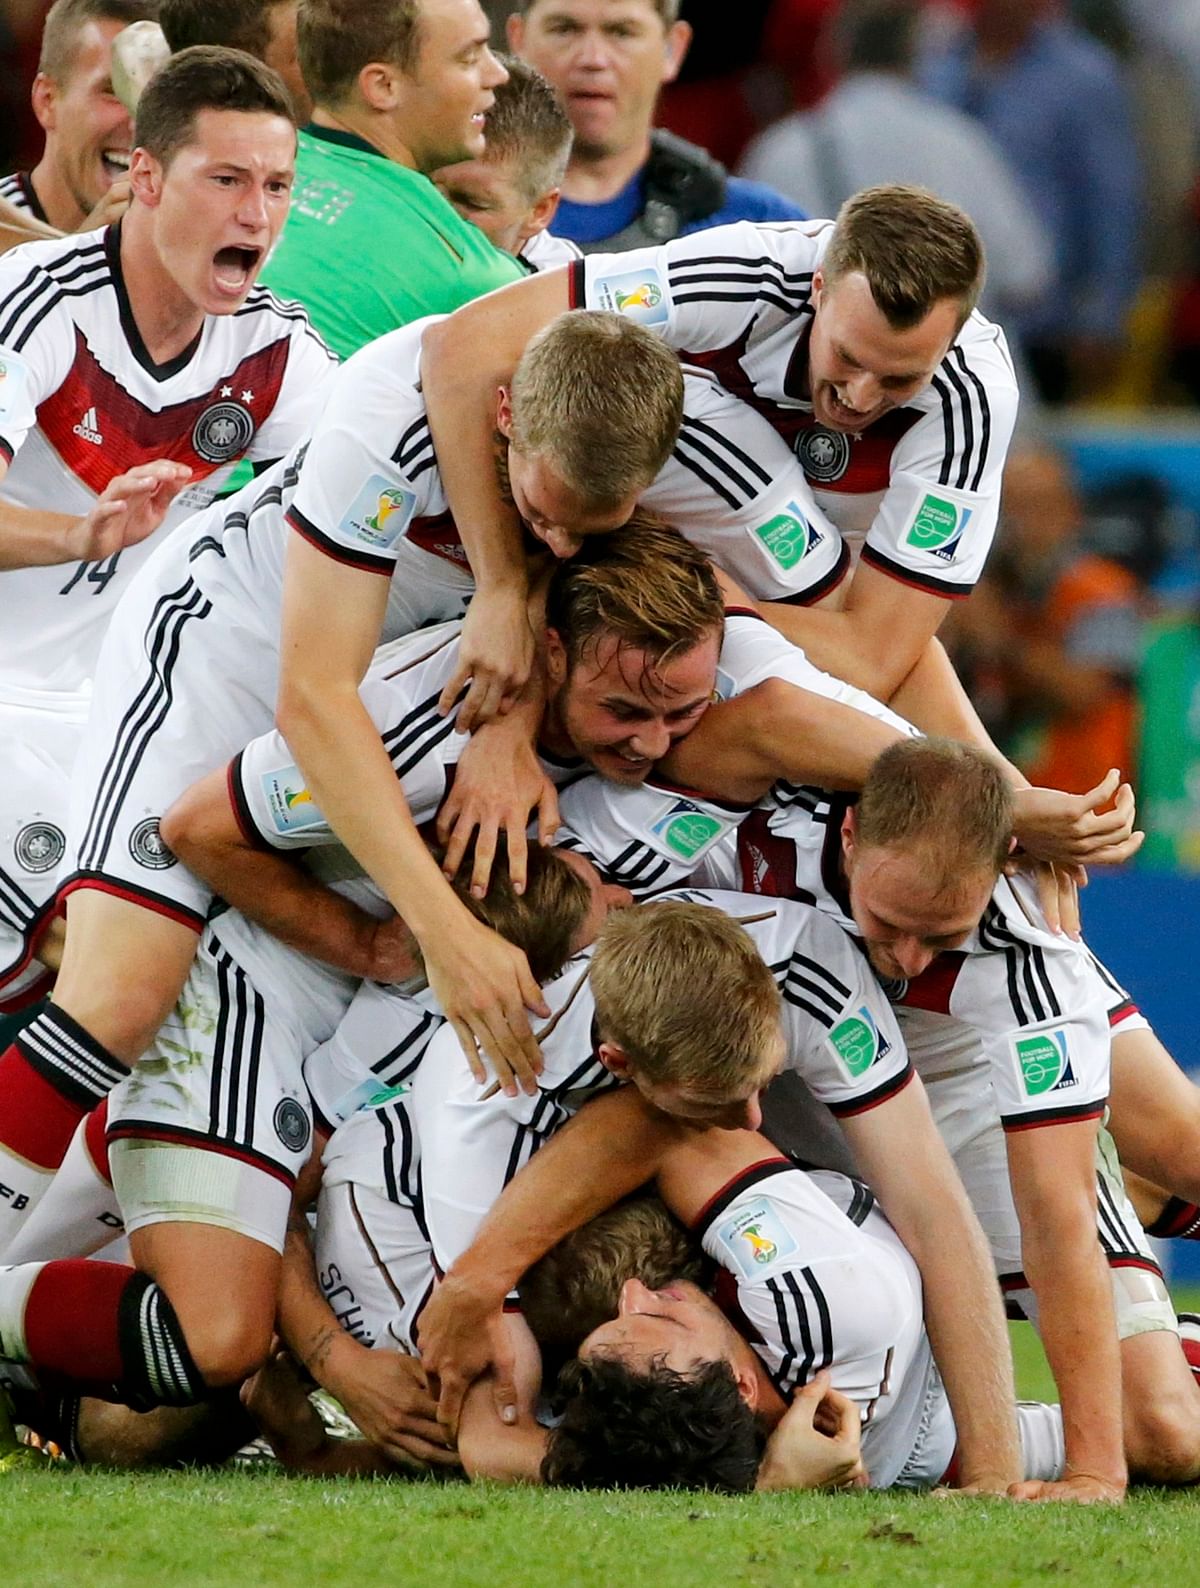 Germany's team celebrates after winning their 2014 World Cup final against Argentina at the Maracana stadium in Rio de Janeiro on July 13, 2014. Reuters